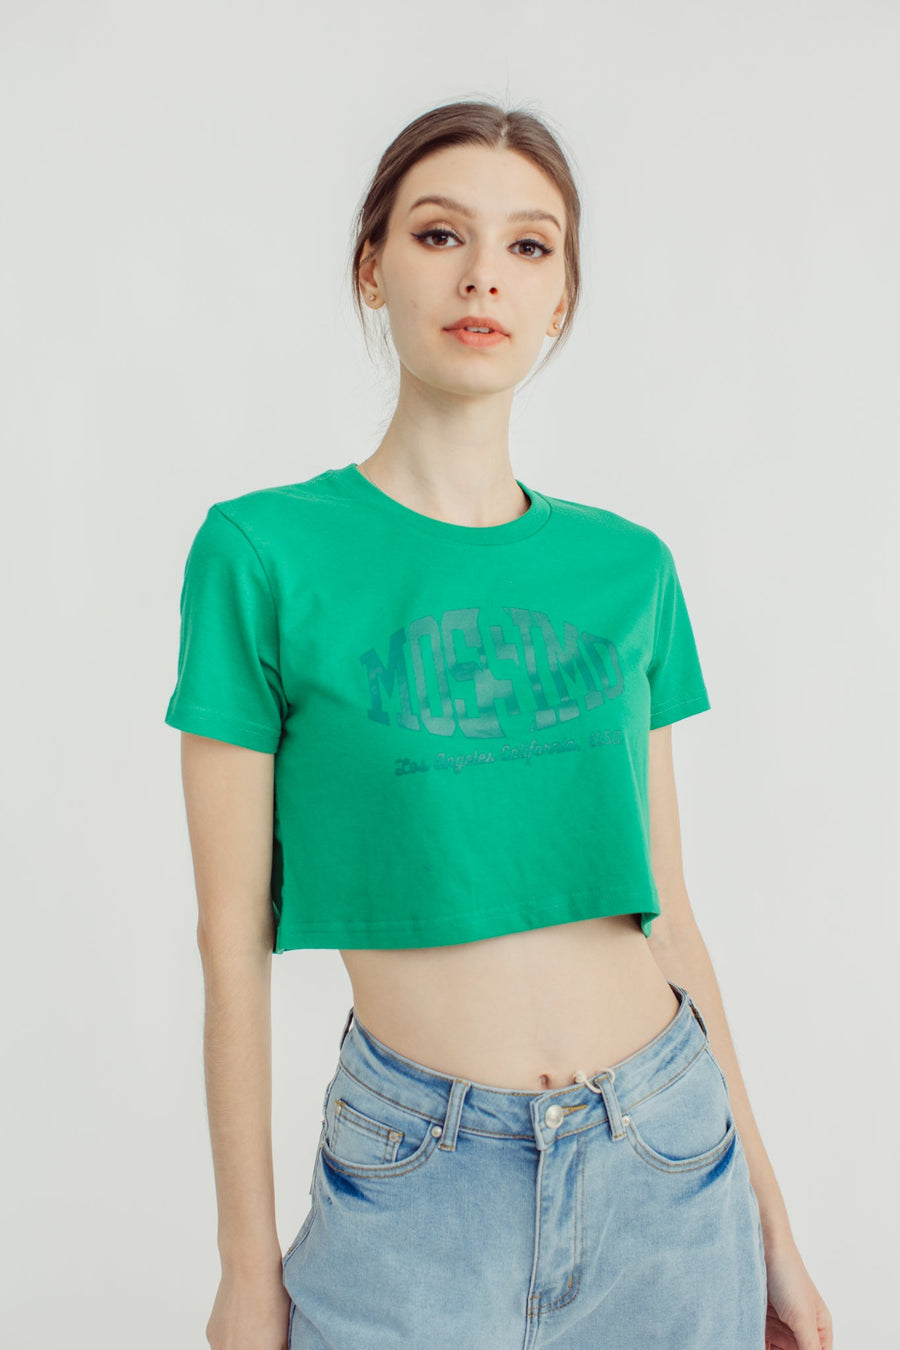 Jellybean with Mossimo Los Angeles Cali, USA Vintage Cropped Fit Tee - Mossimo PH